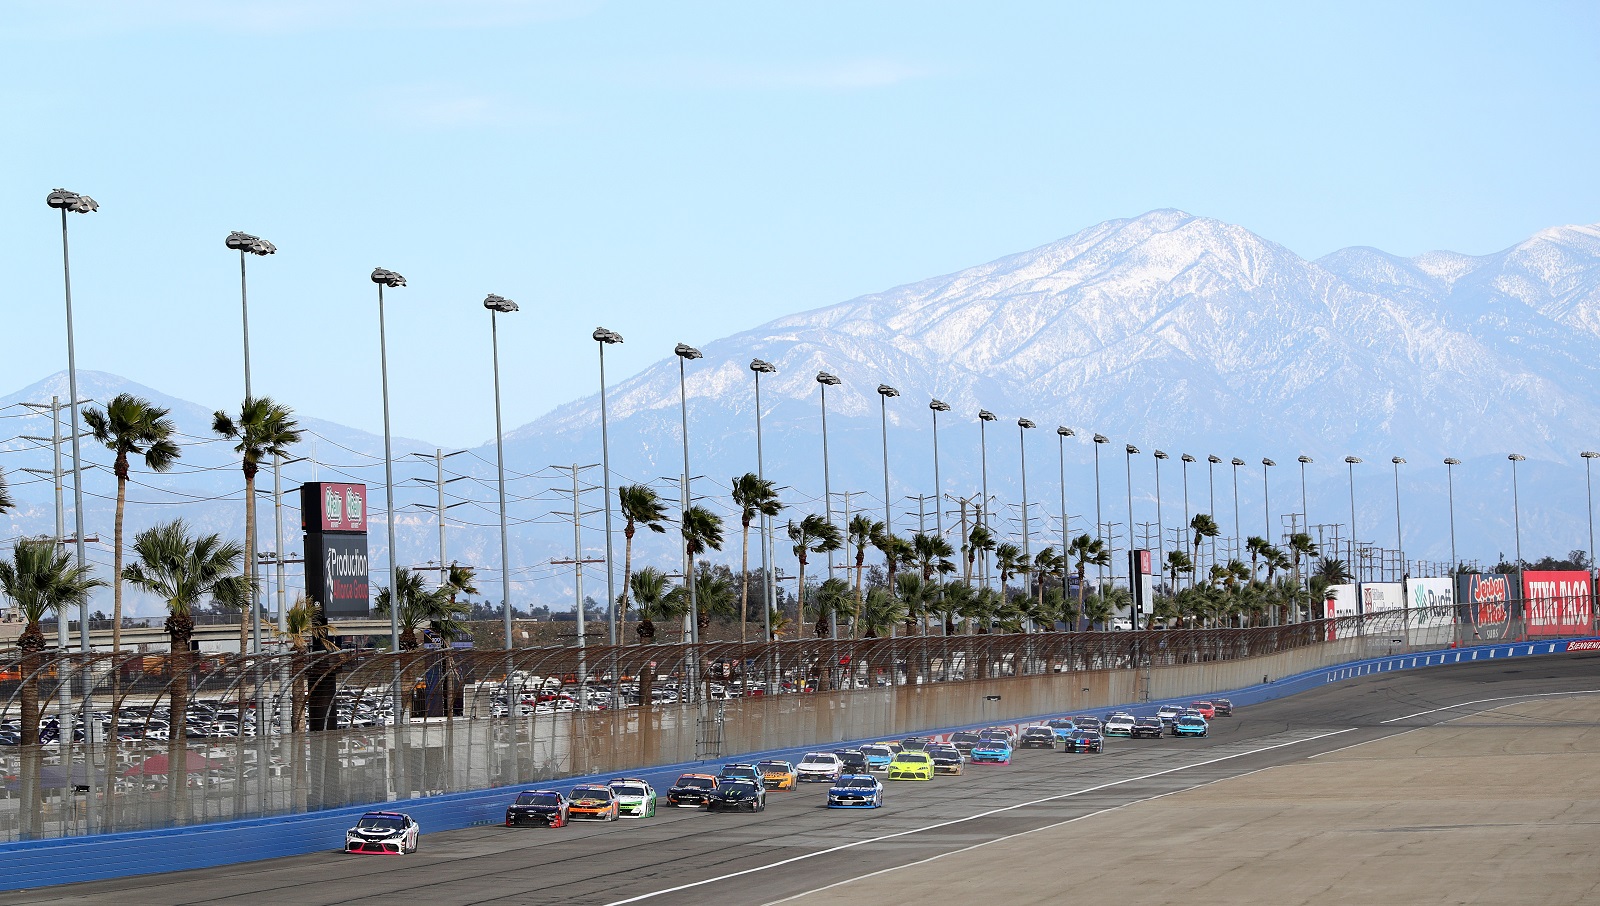 A general view of racing during the NASCAR Xfinity Series Production Alliance 300 at Auto Club Speedway on Feb. 26, 2022 in Fontana, California. | Meg Oliphant/Getty Images